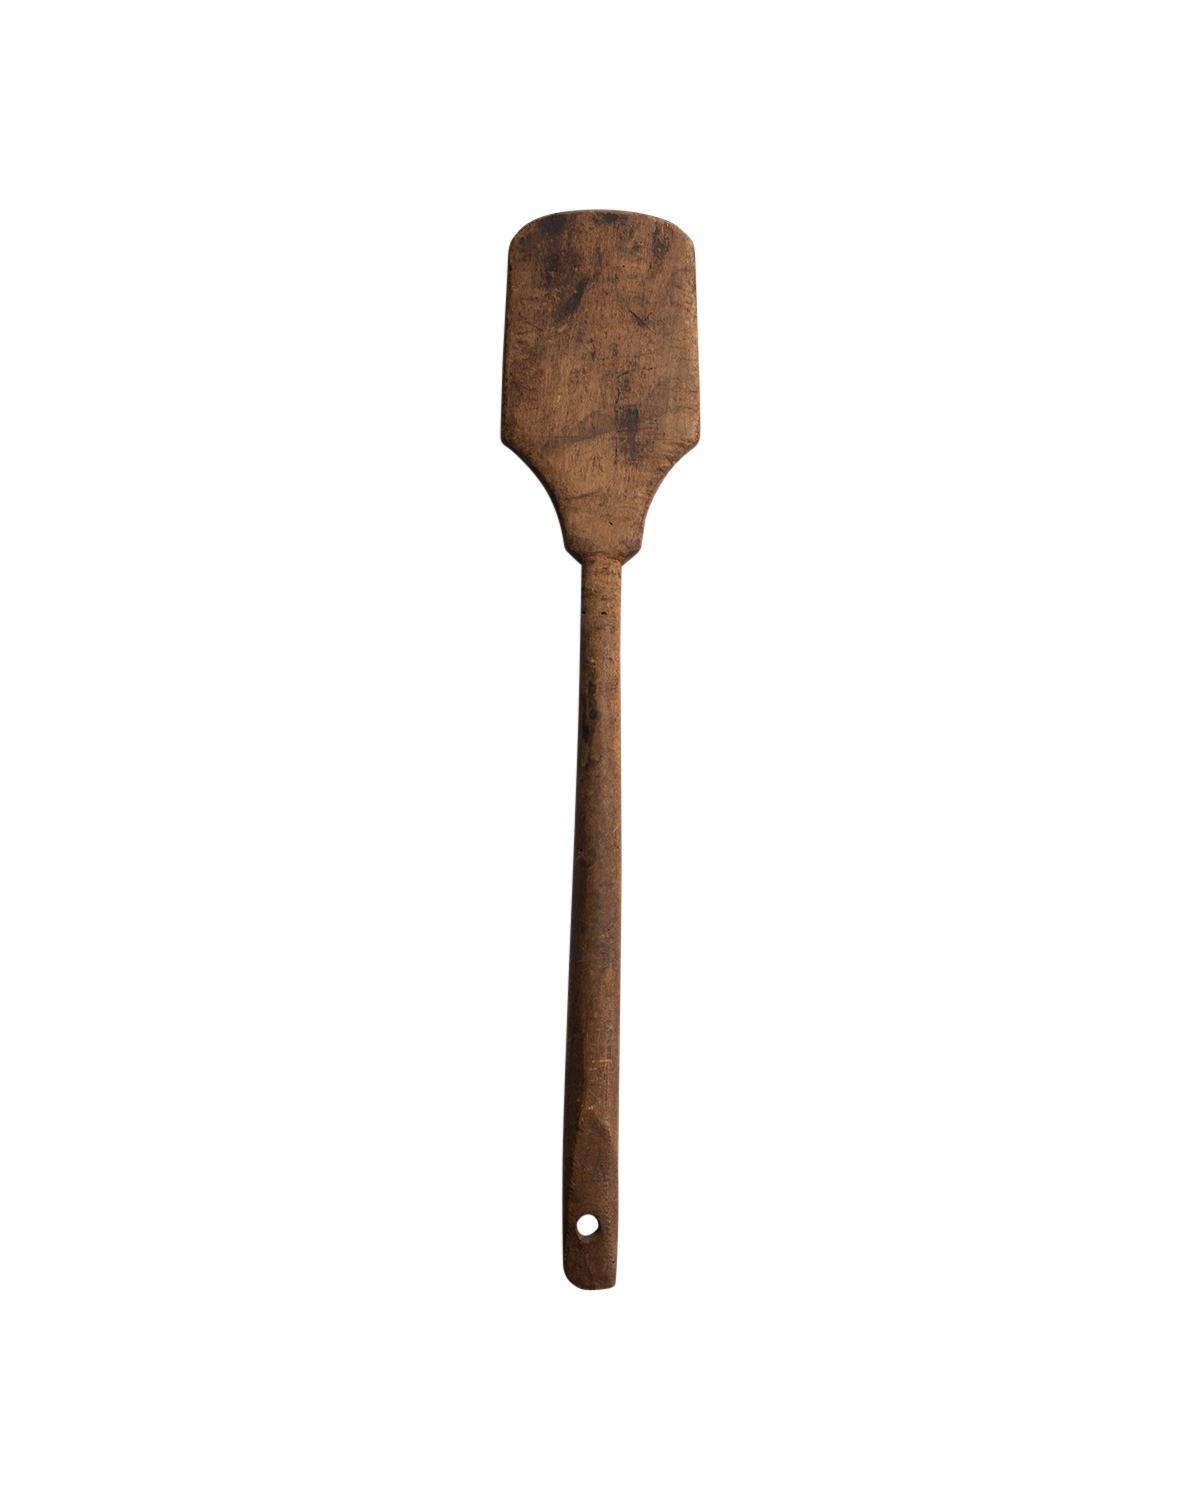 French antique wooden spatula